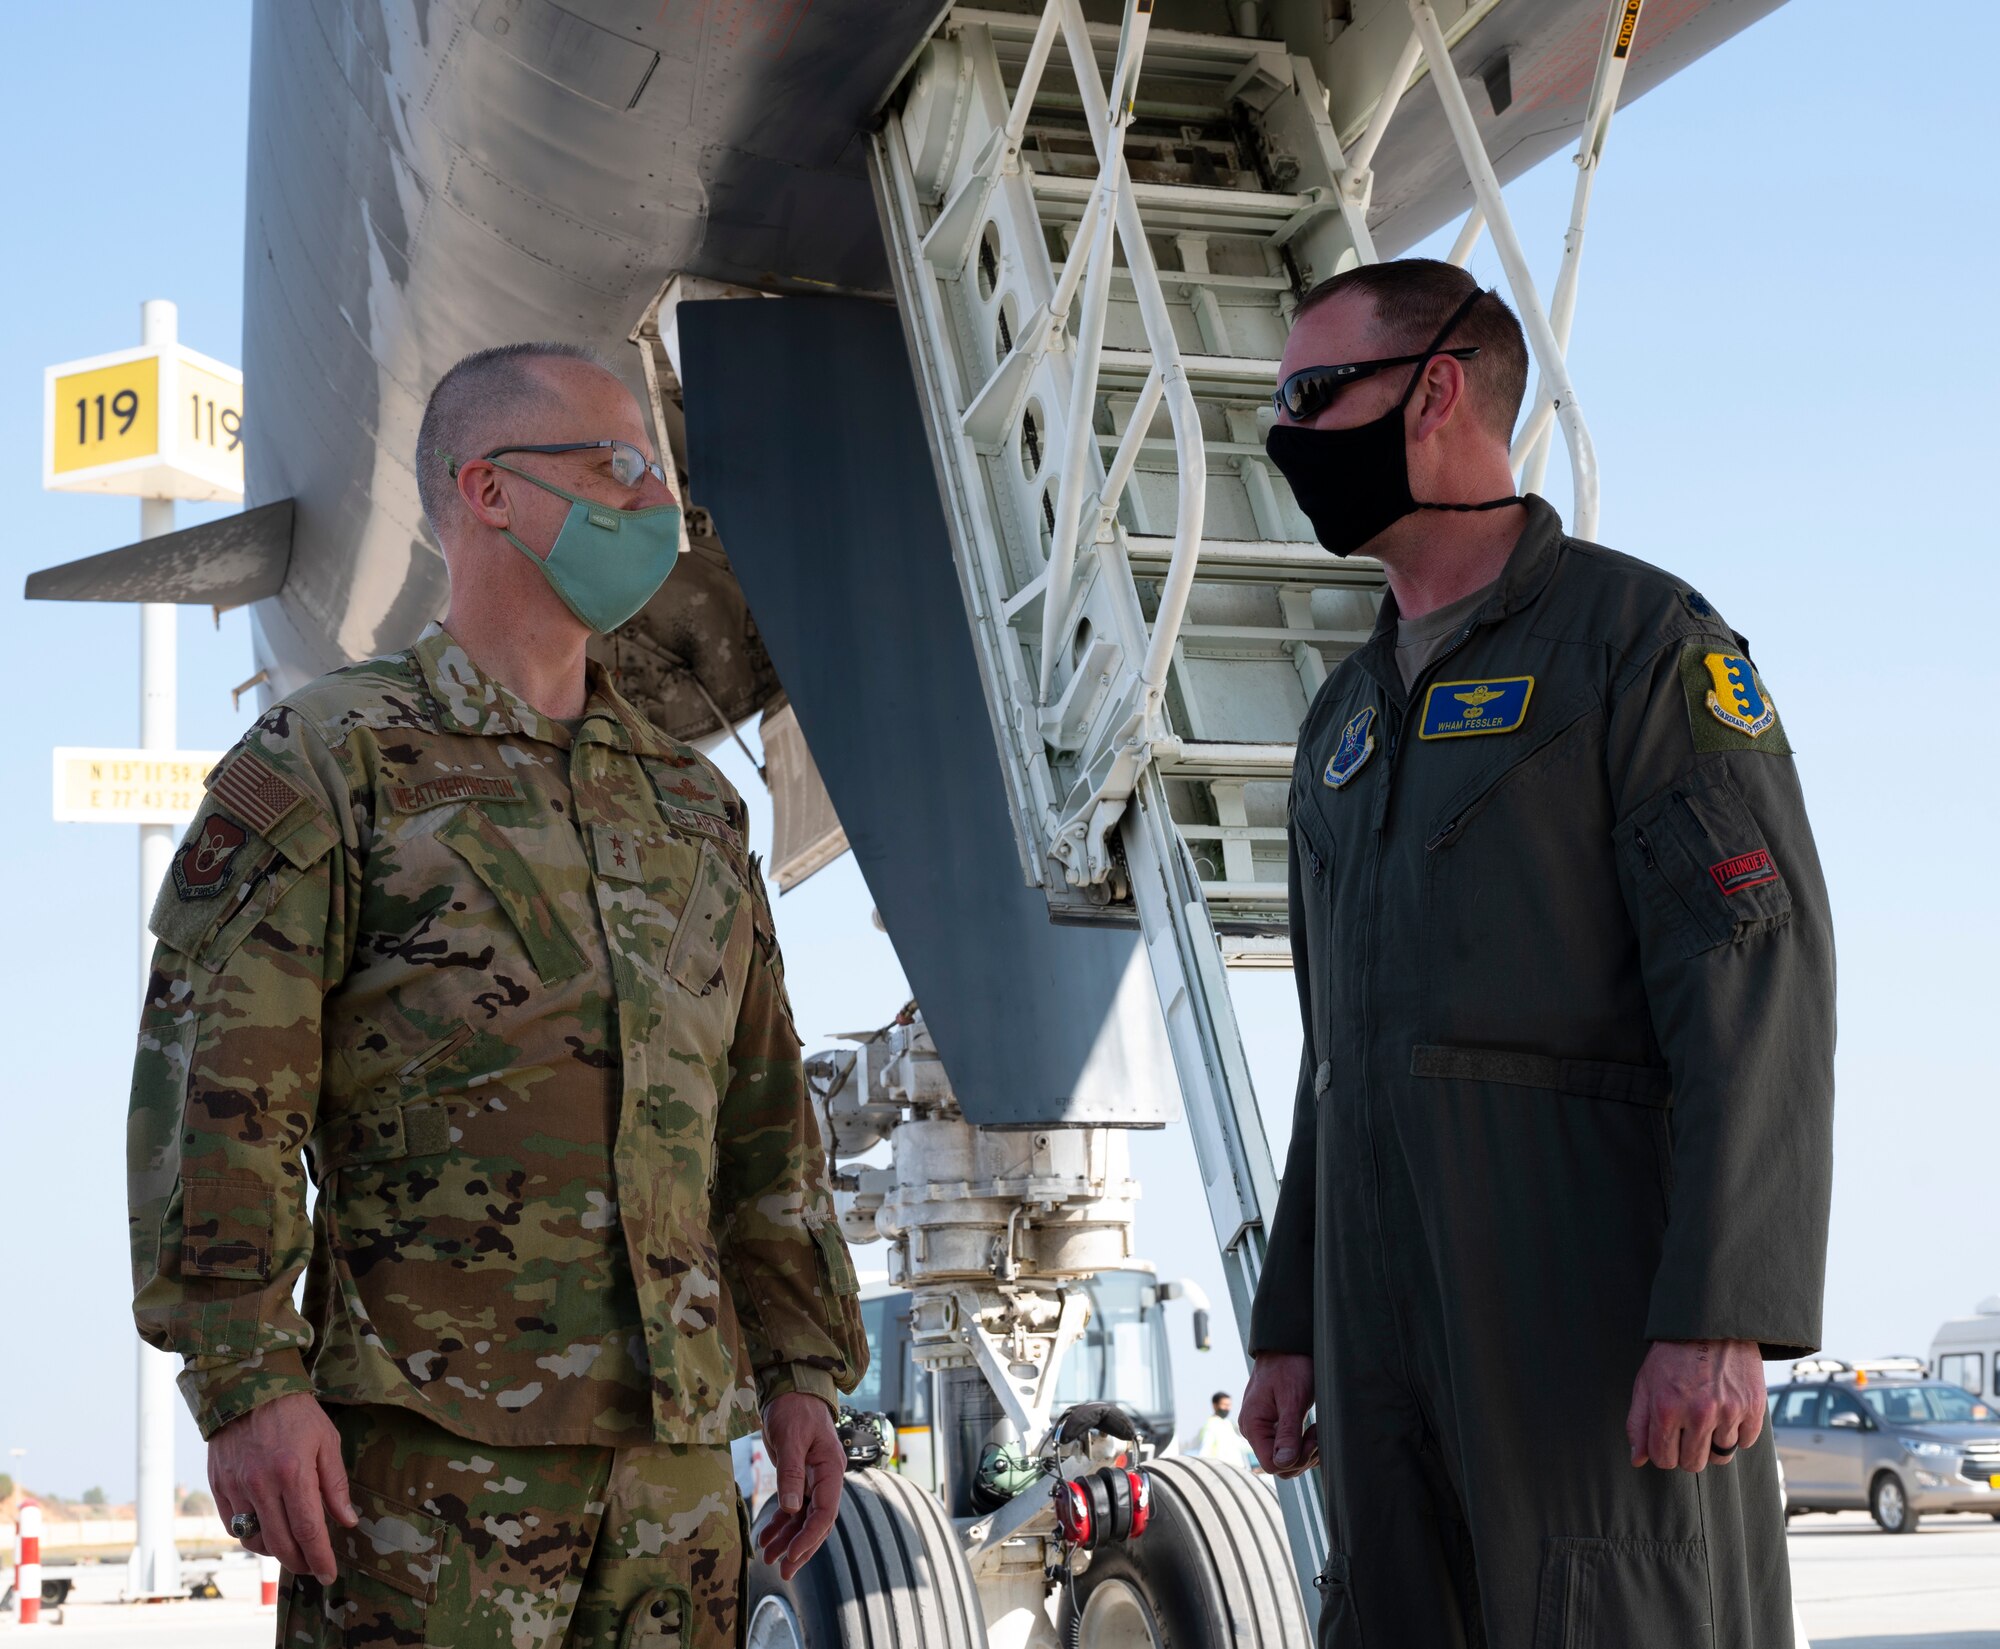 Maj. Gen. Mark Weatherington, the Eighth Air Force commander, greets Lt. Col. Michael Fessler, the 34th Expeditionary Bomb Squadron commander, at Kempegowda International Airport in Bengaluru, India, Feb. 1, 2021. Fessler was part of a four-member crew that flew a B-1B Lancer from Ellsworth Air Force Base, S.D., to India to participate in the Aero India 2021 tradeshow. The non-stop, 26-hour sortie demonstrates the long-range capabilities of the B-1B and its aircrew. (U.S. Air Force photo by Senior Airman Christina Bennett)